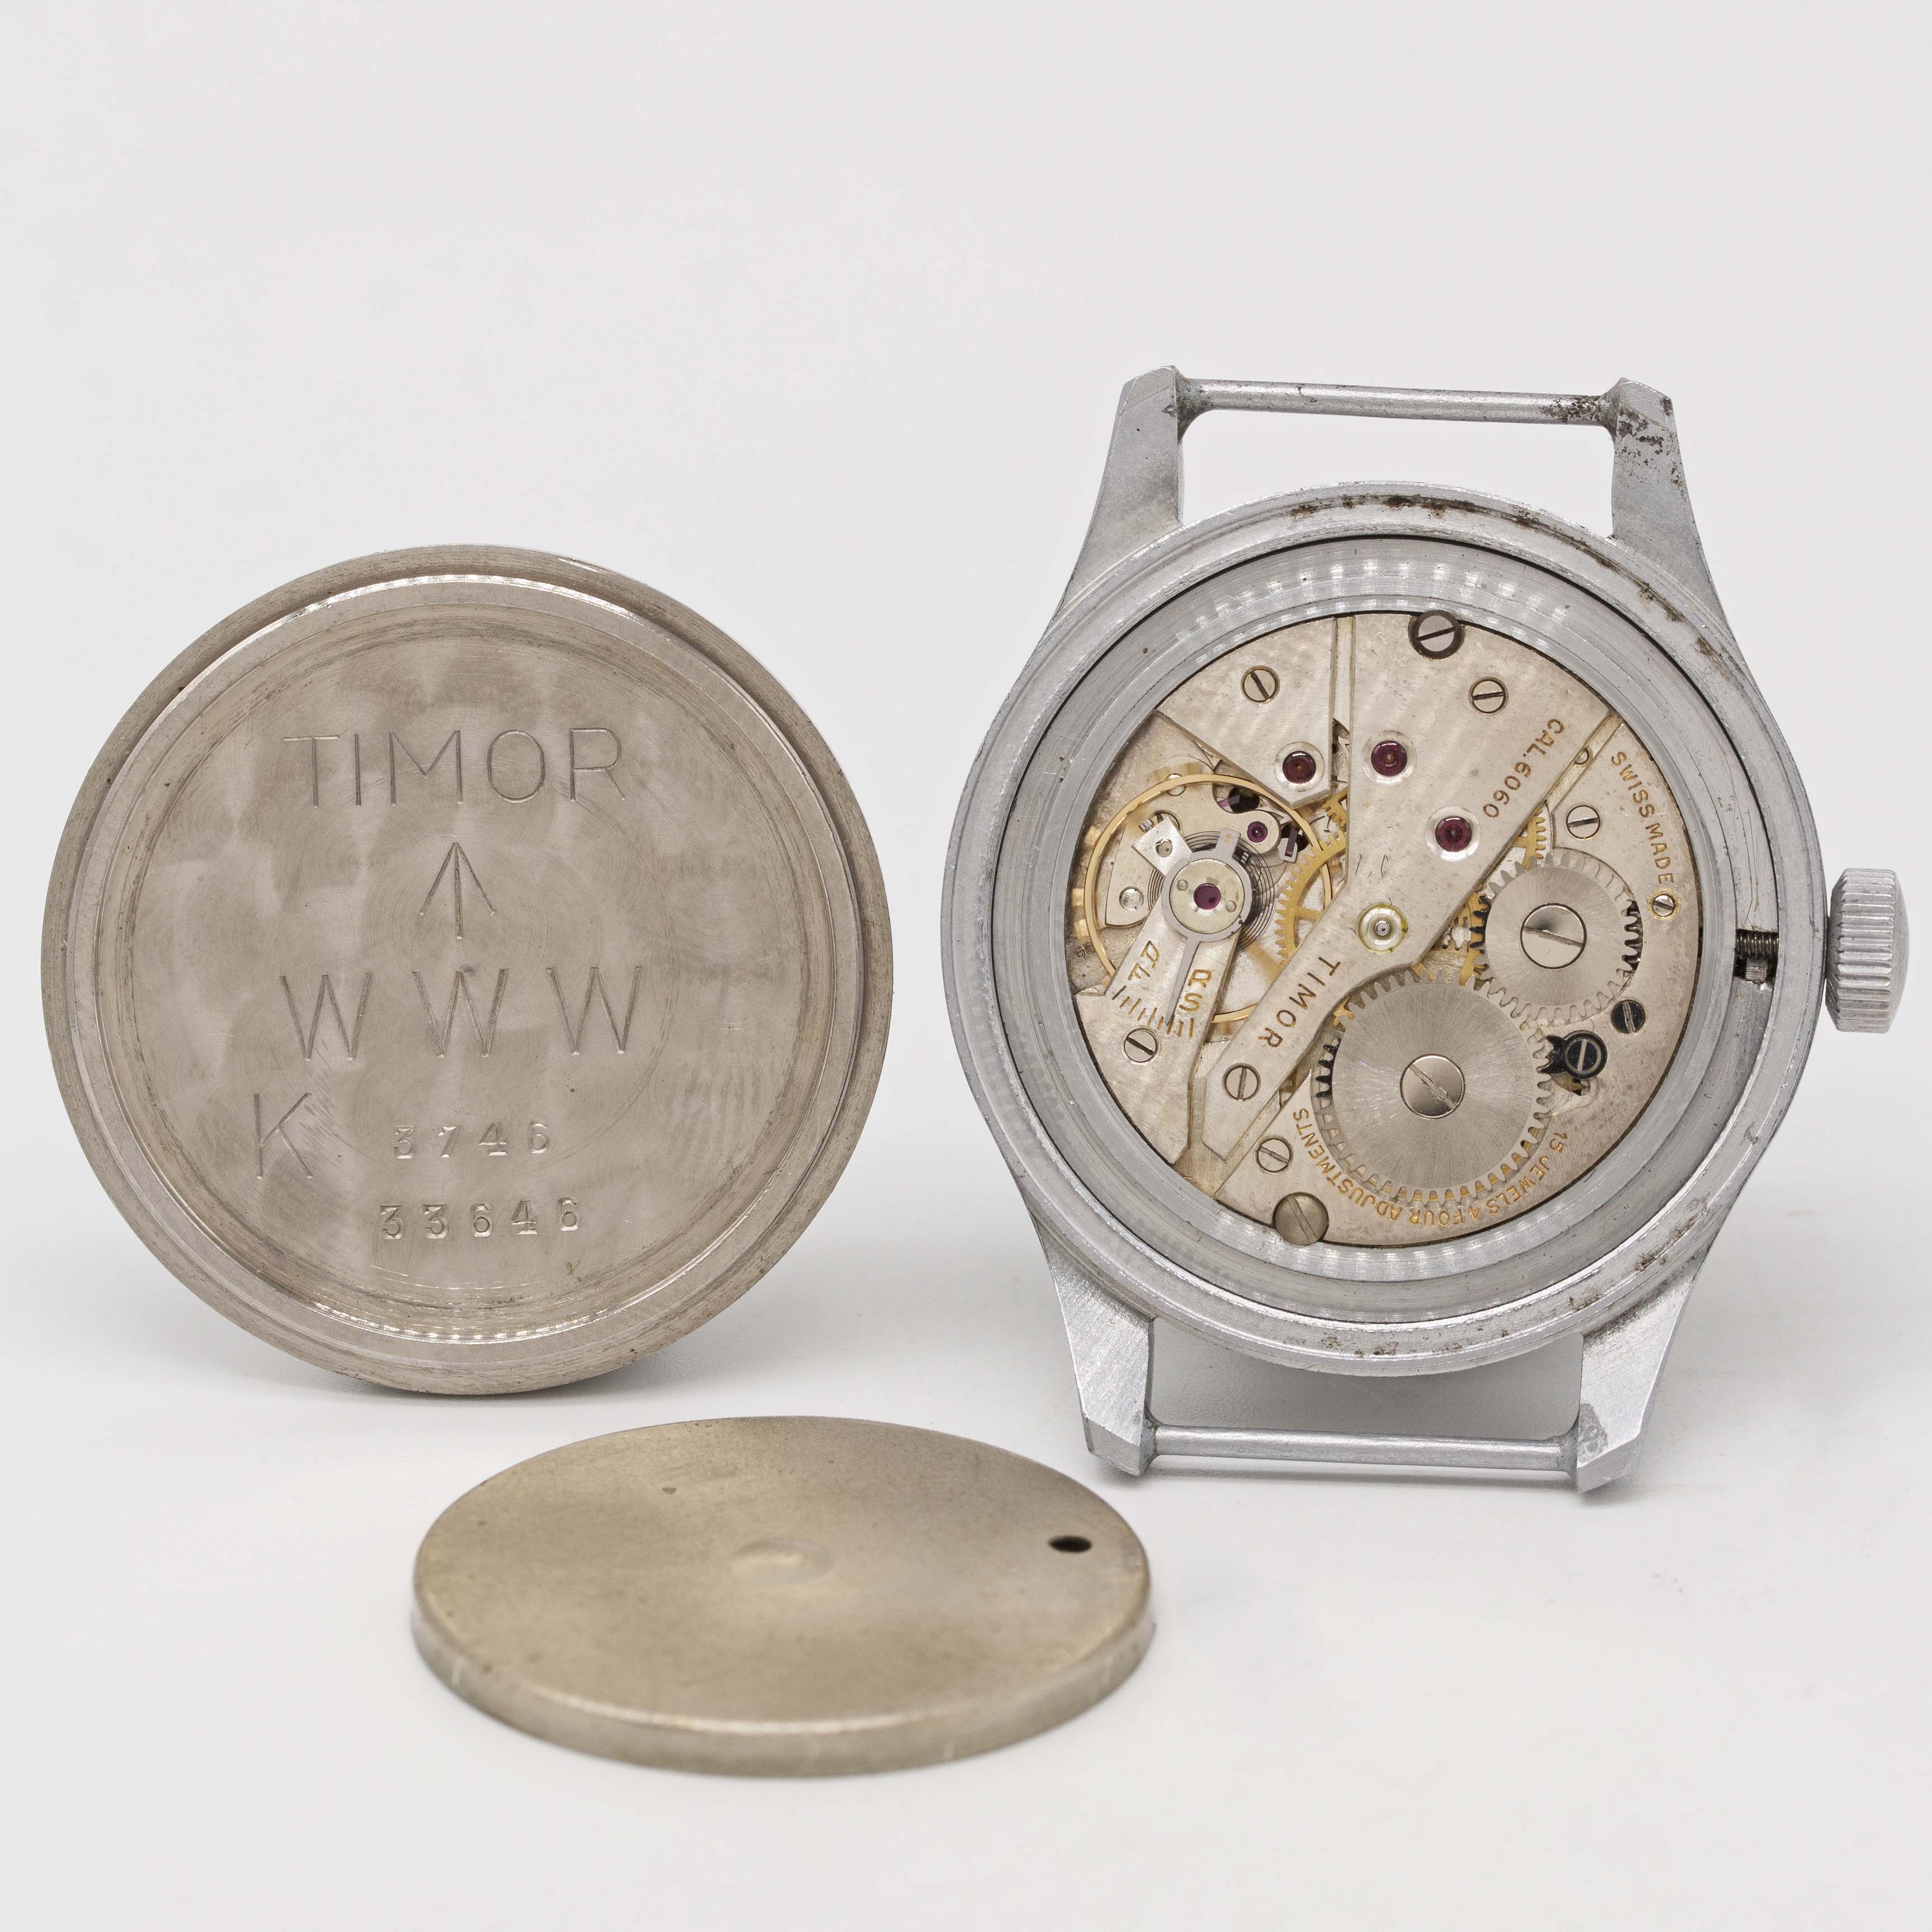 A GENTLEMAN'S STAINLESS STEEL BRITISH MILITARY TIMOR W.W.W. WRIST WATCH CIRCA 1940s, PART OF THE " - Image 4 of 4